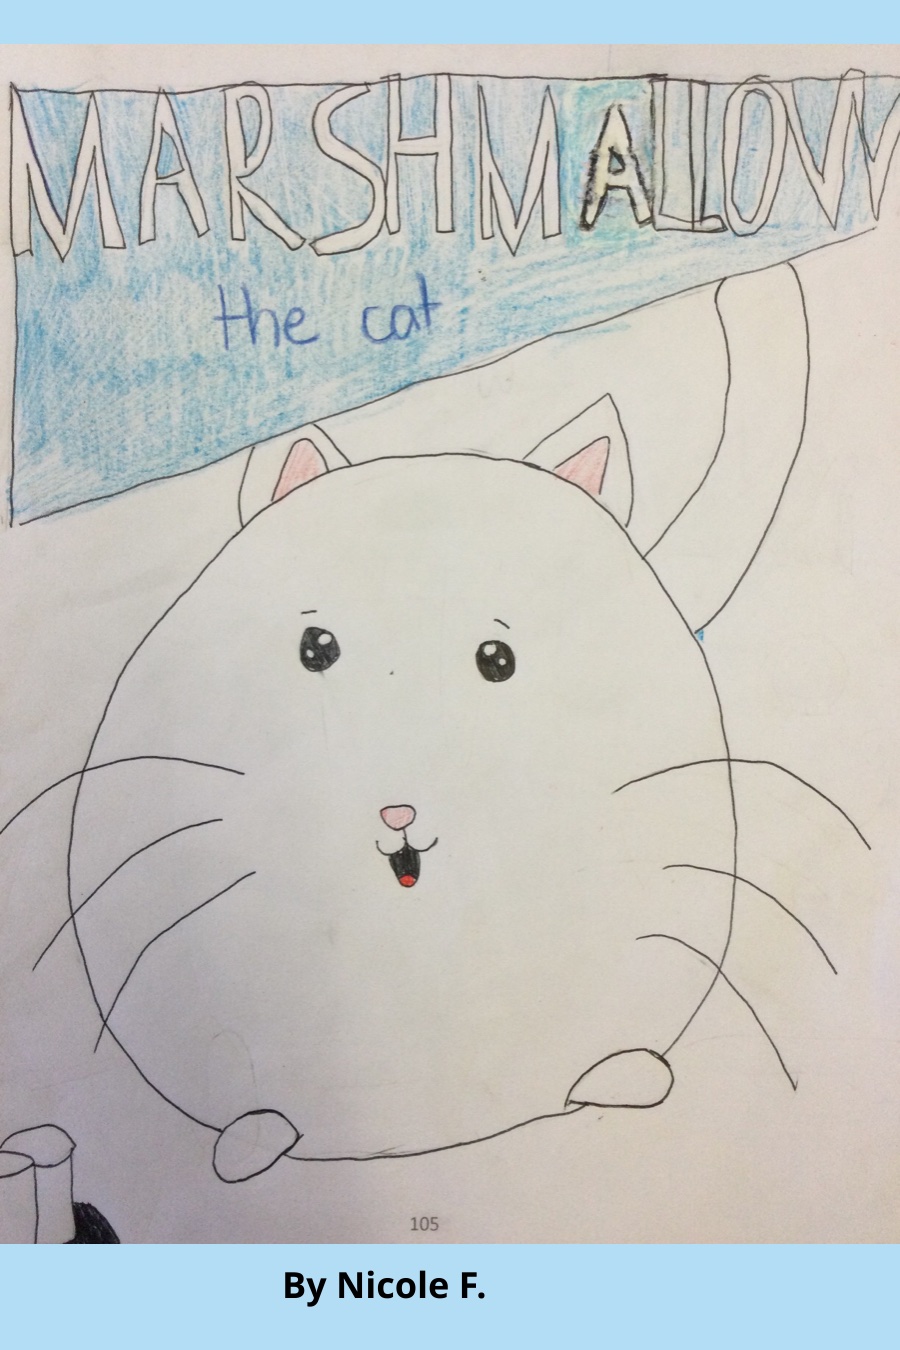 Marshmallow the Cat by Nicole F